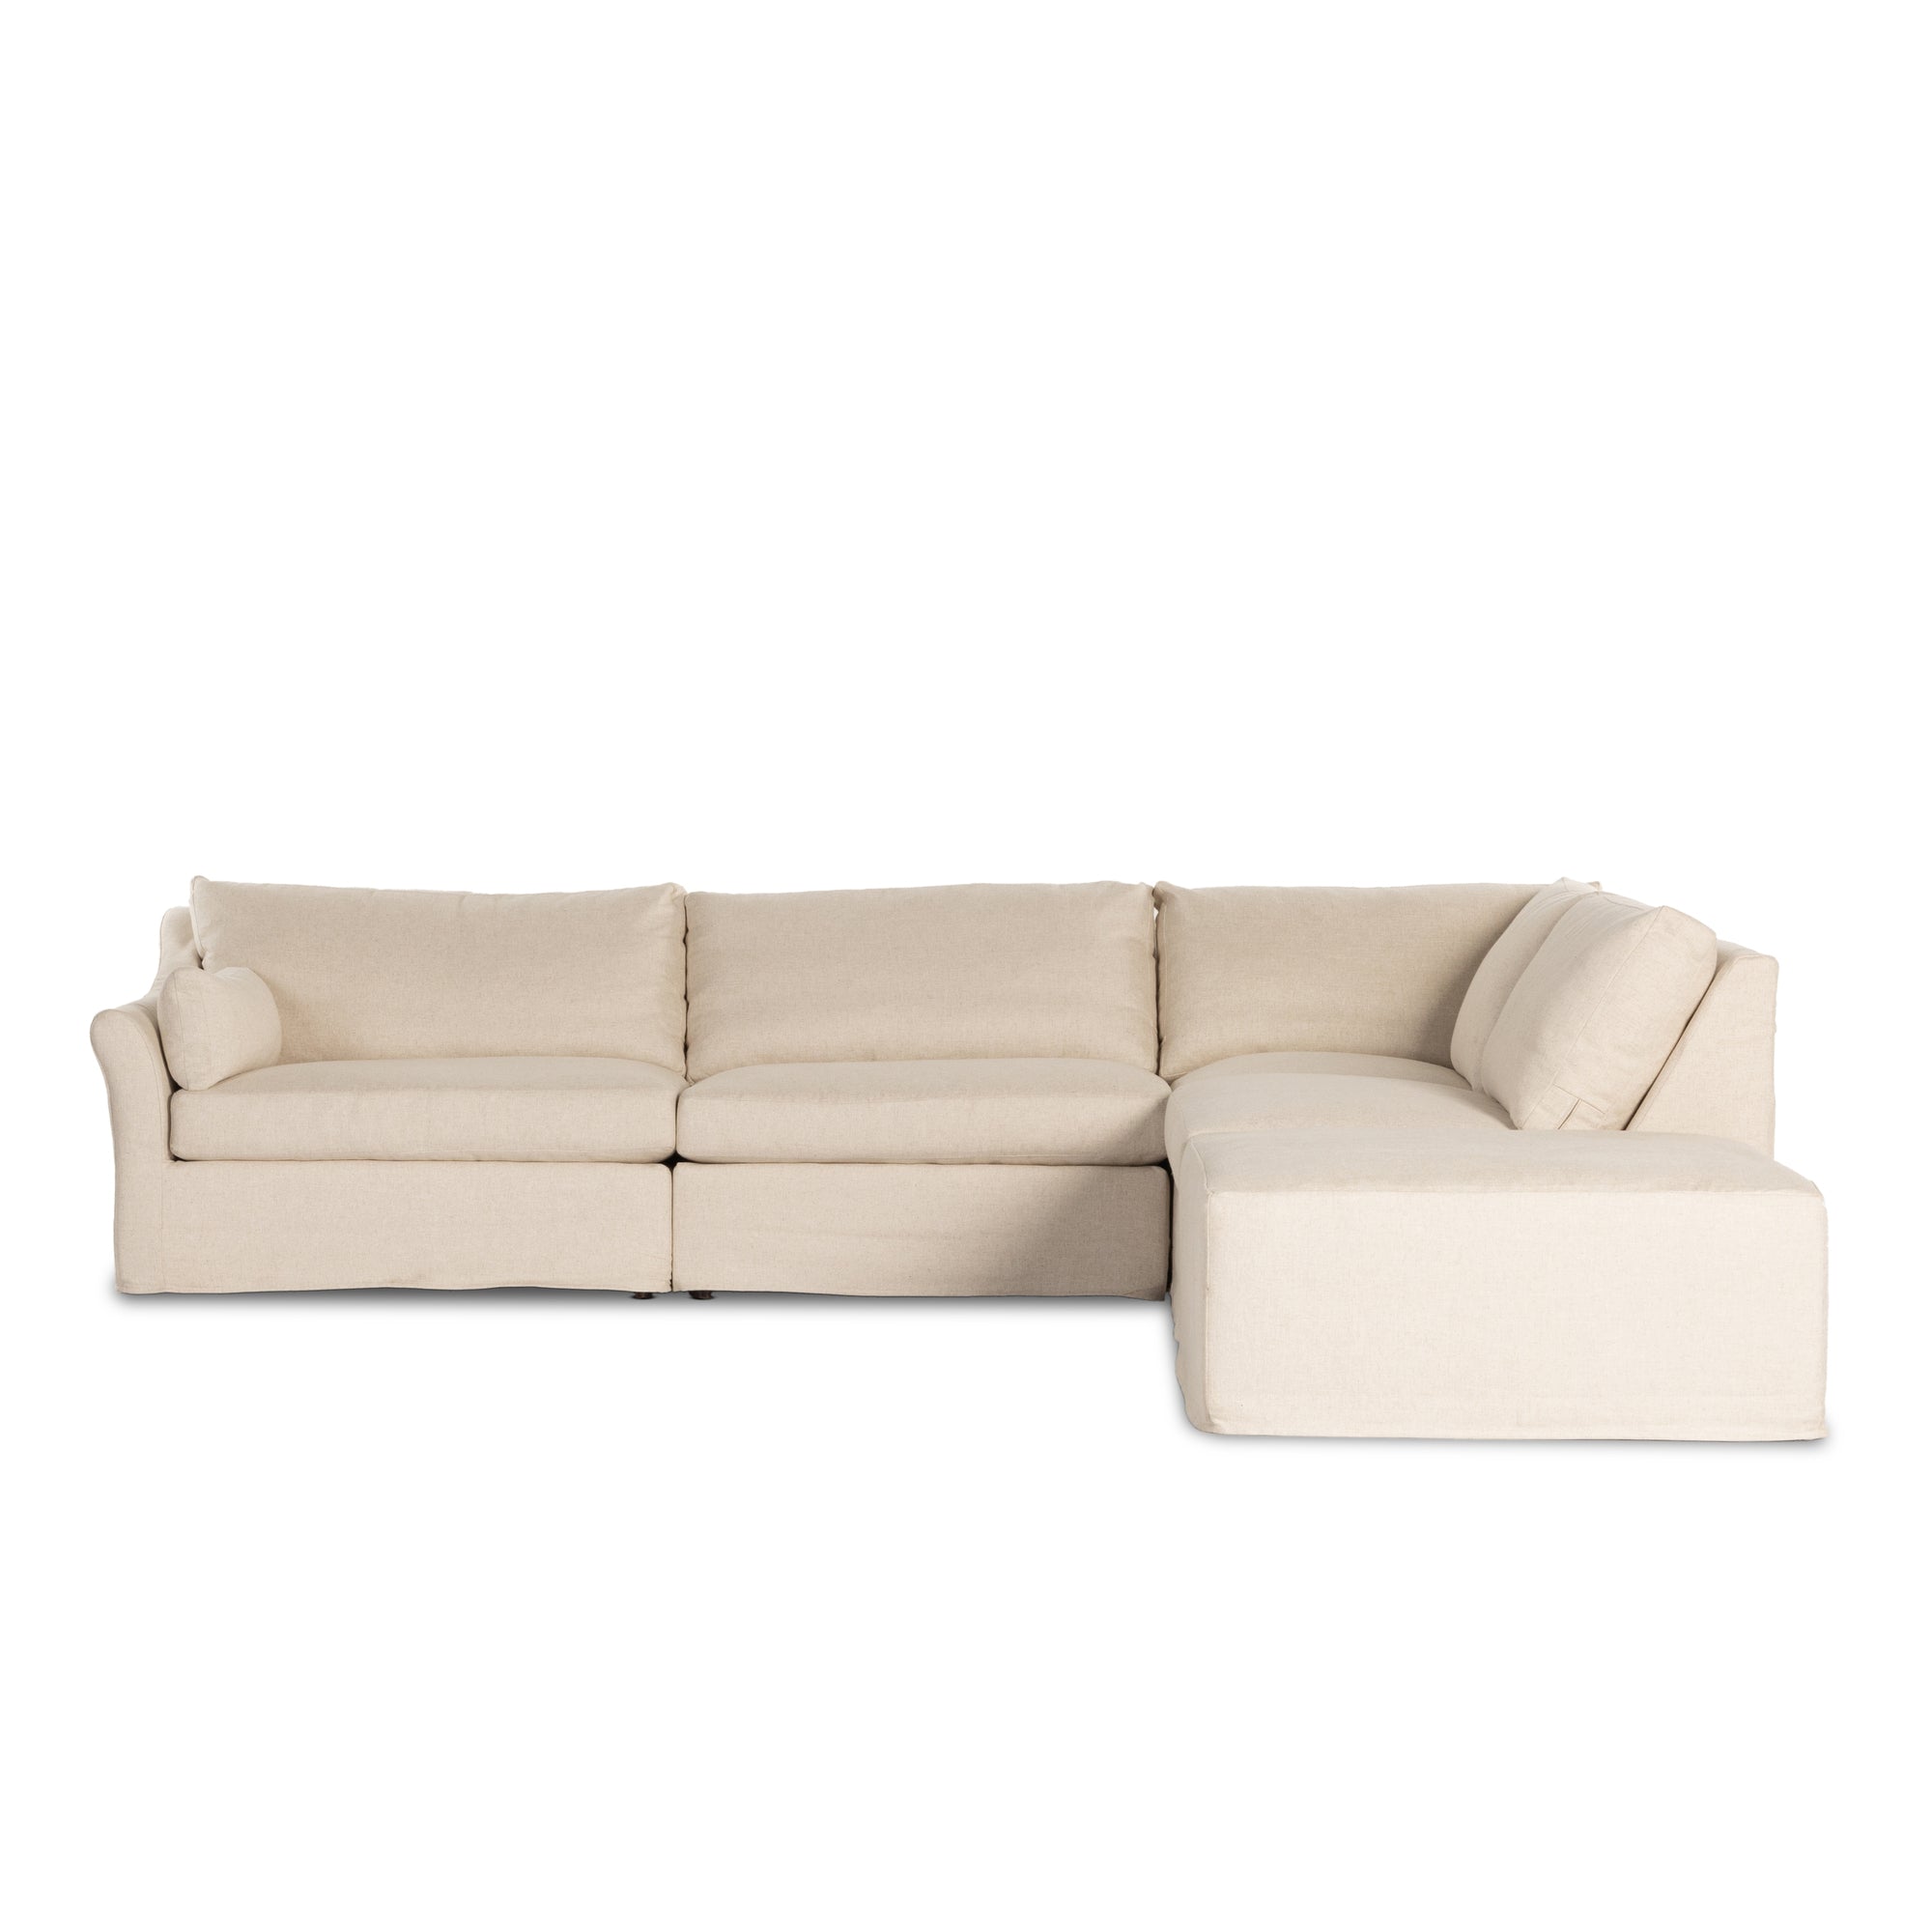 Delray 4-piece Slipcover Sectional